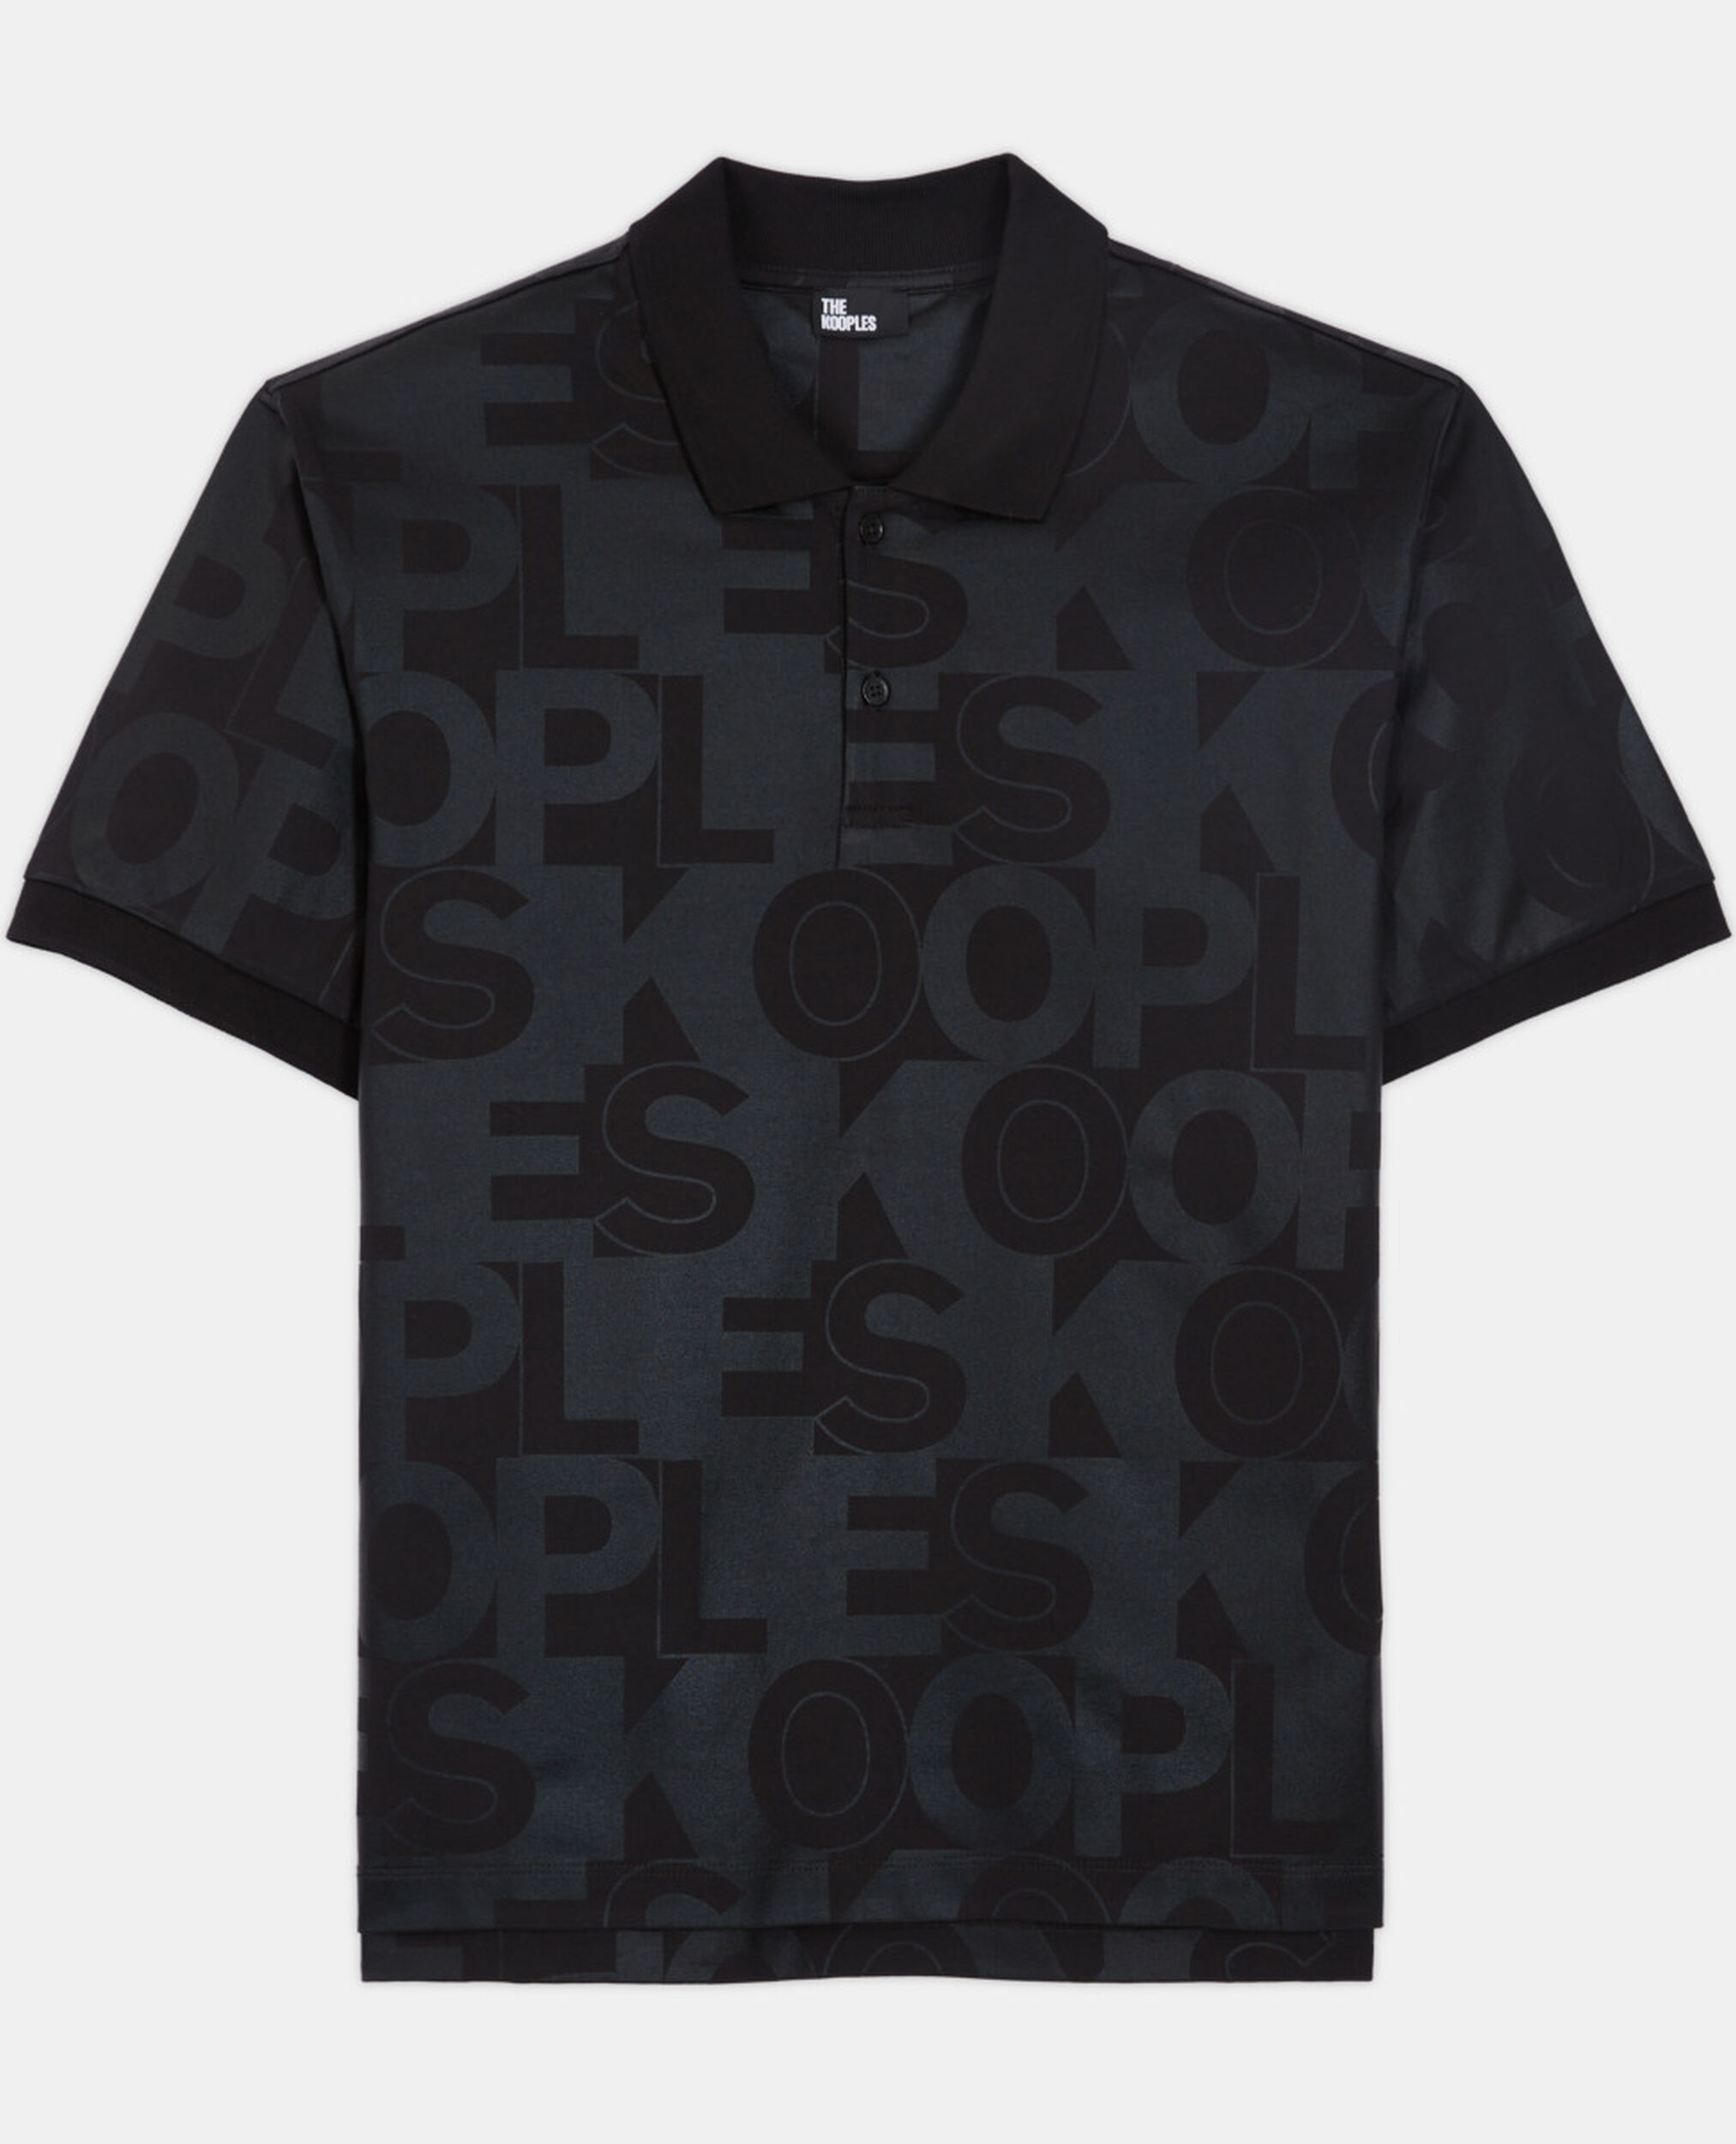 Polo logo The Kooples, BLACK, hi-res image number null